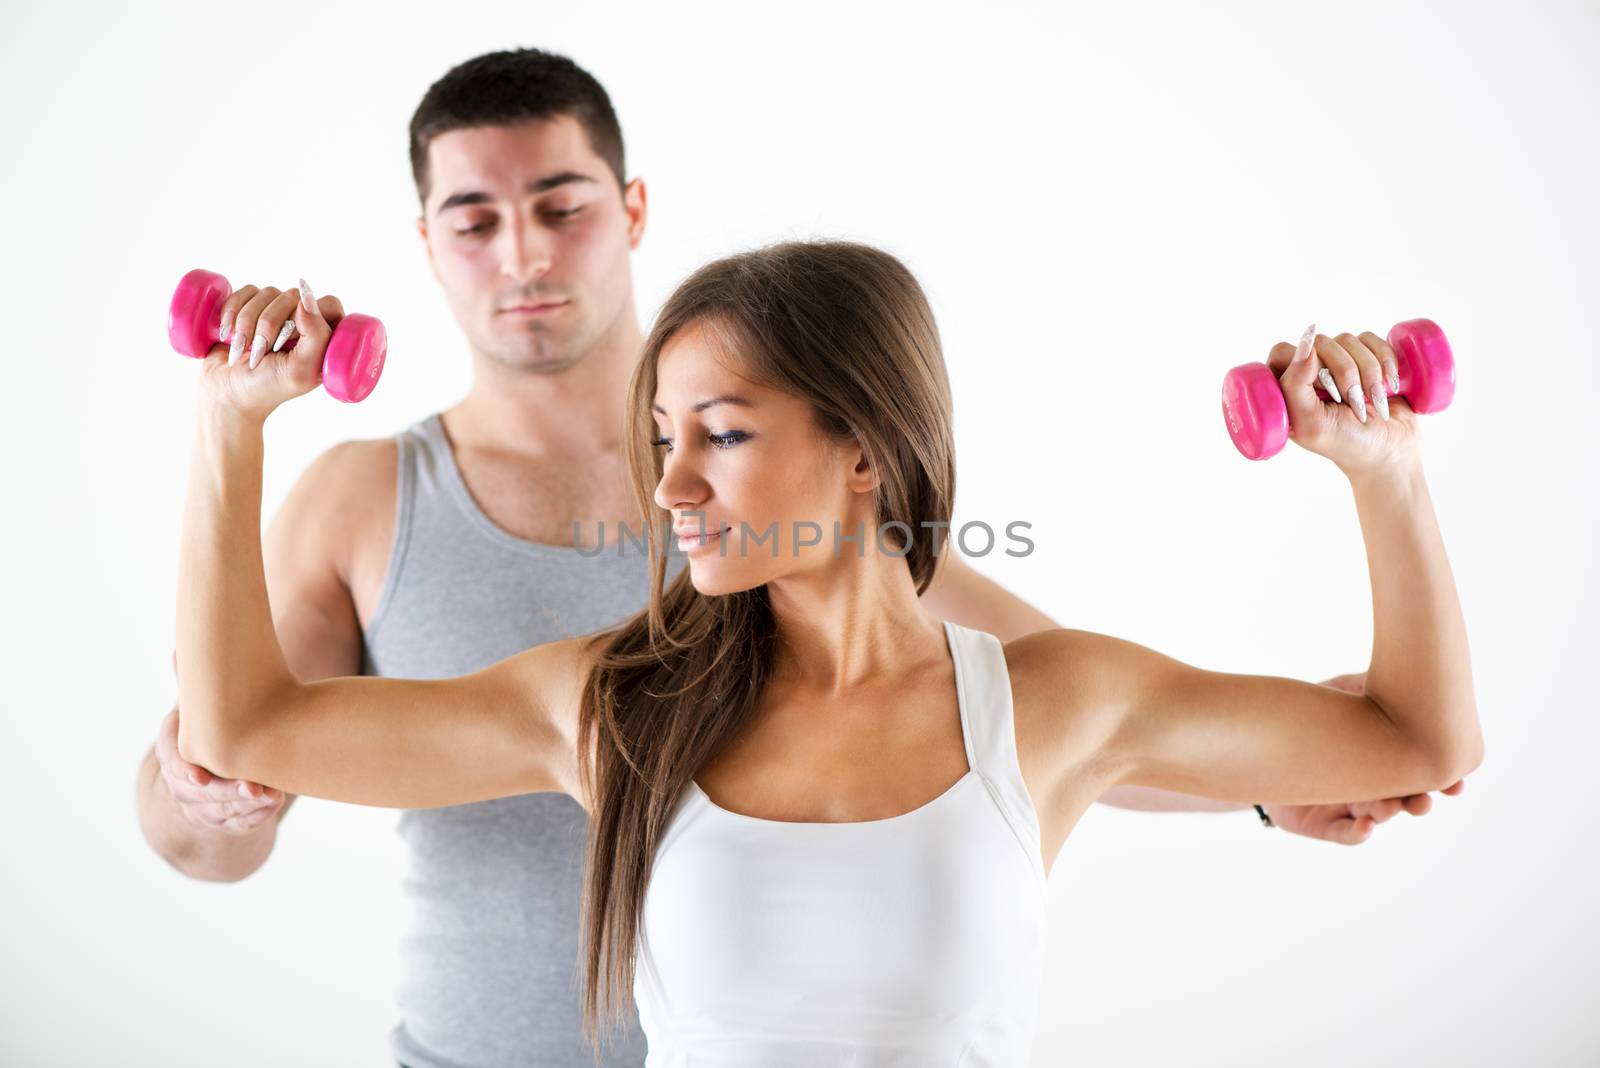 Young beautiful woman practicing upper body muscle group with personal trainer.